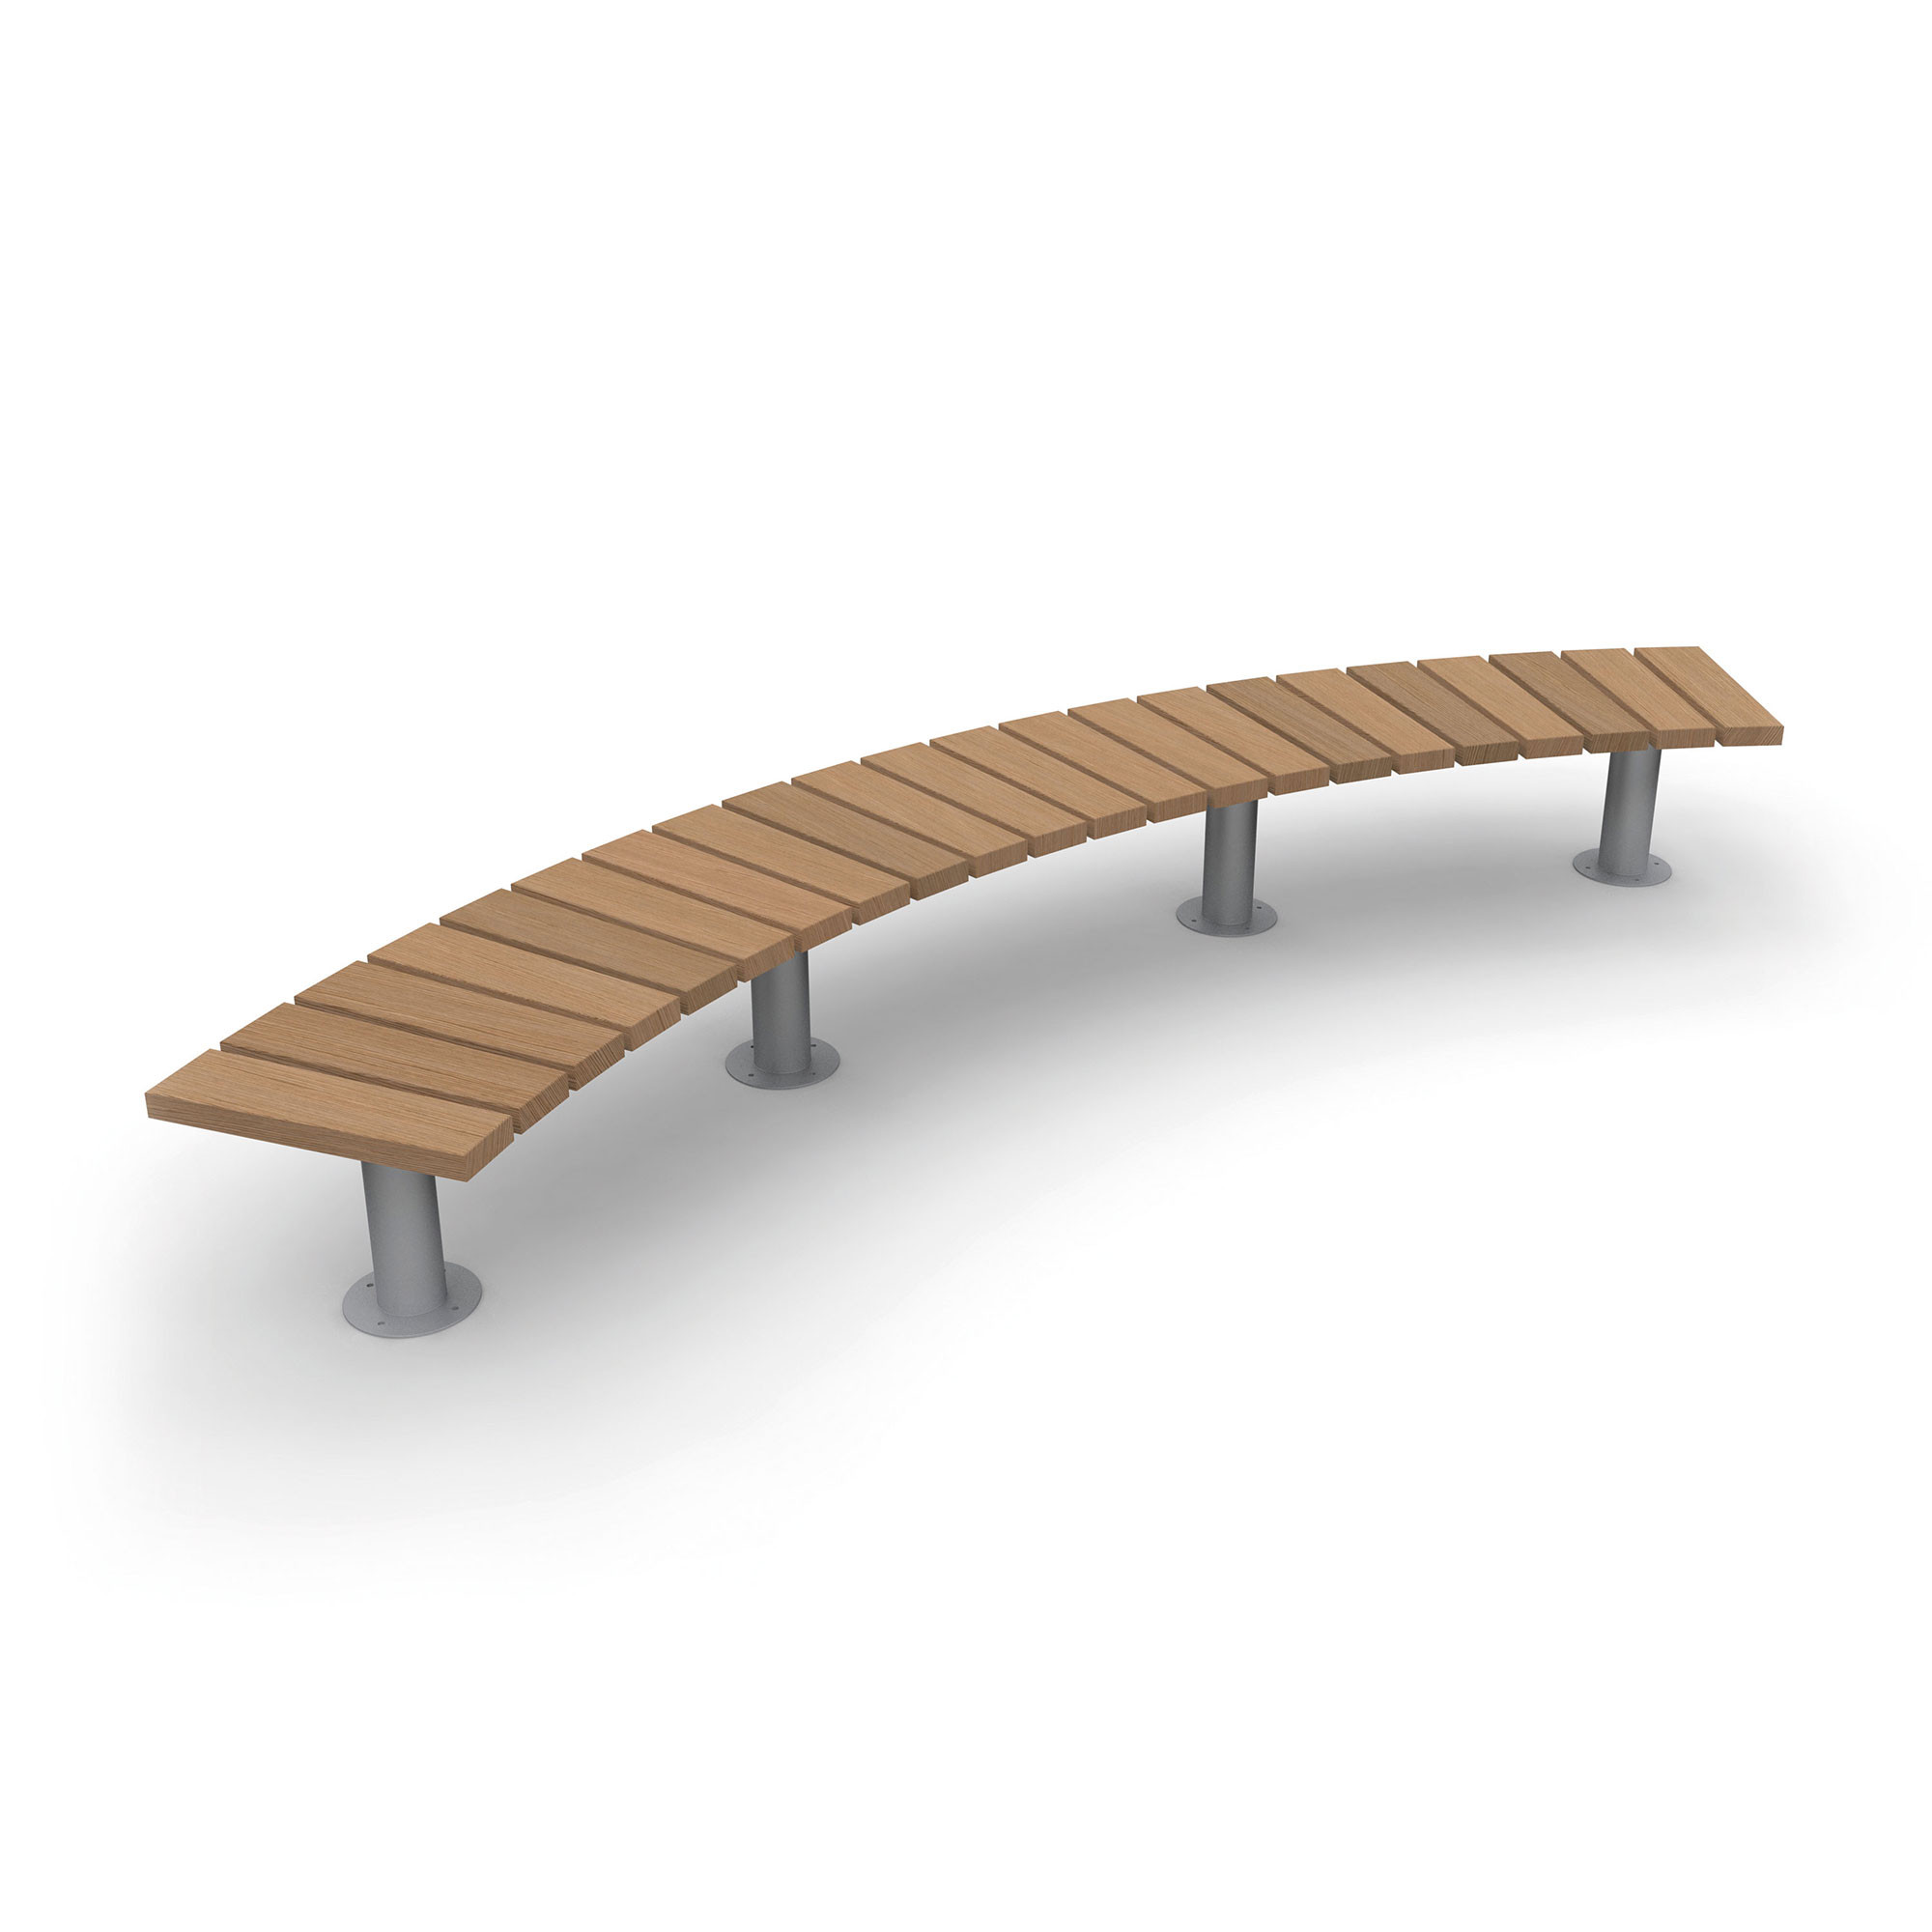 Halo Backless Bench : Curved